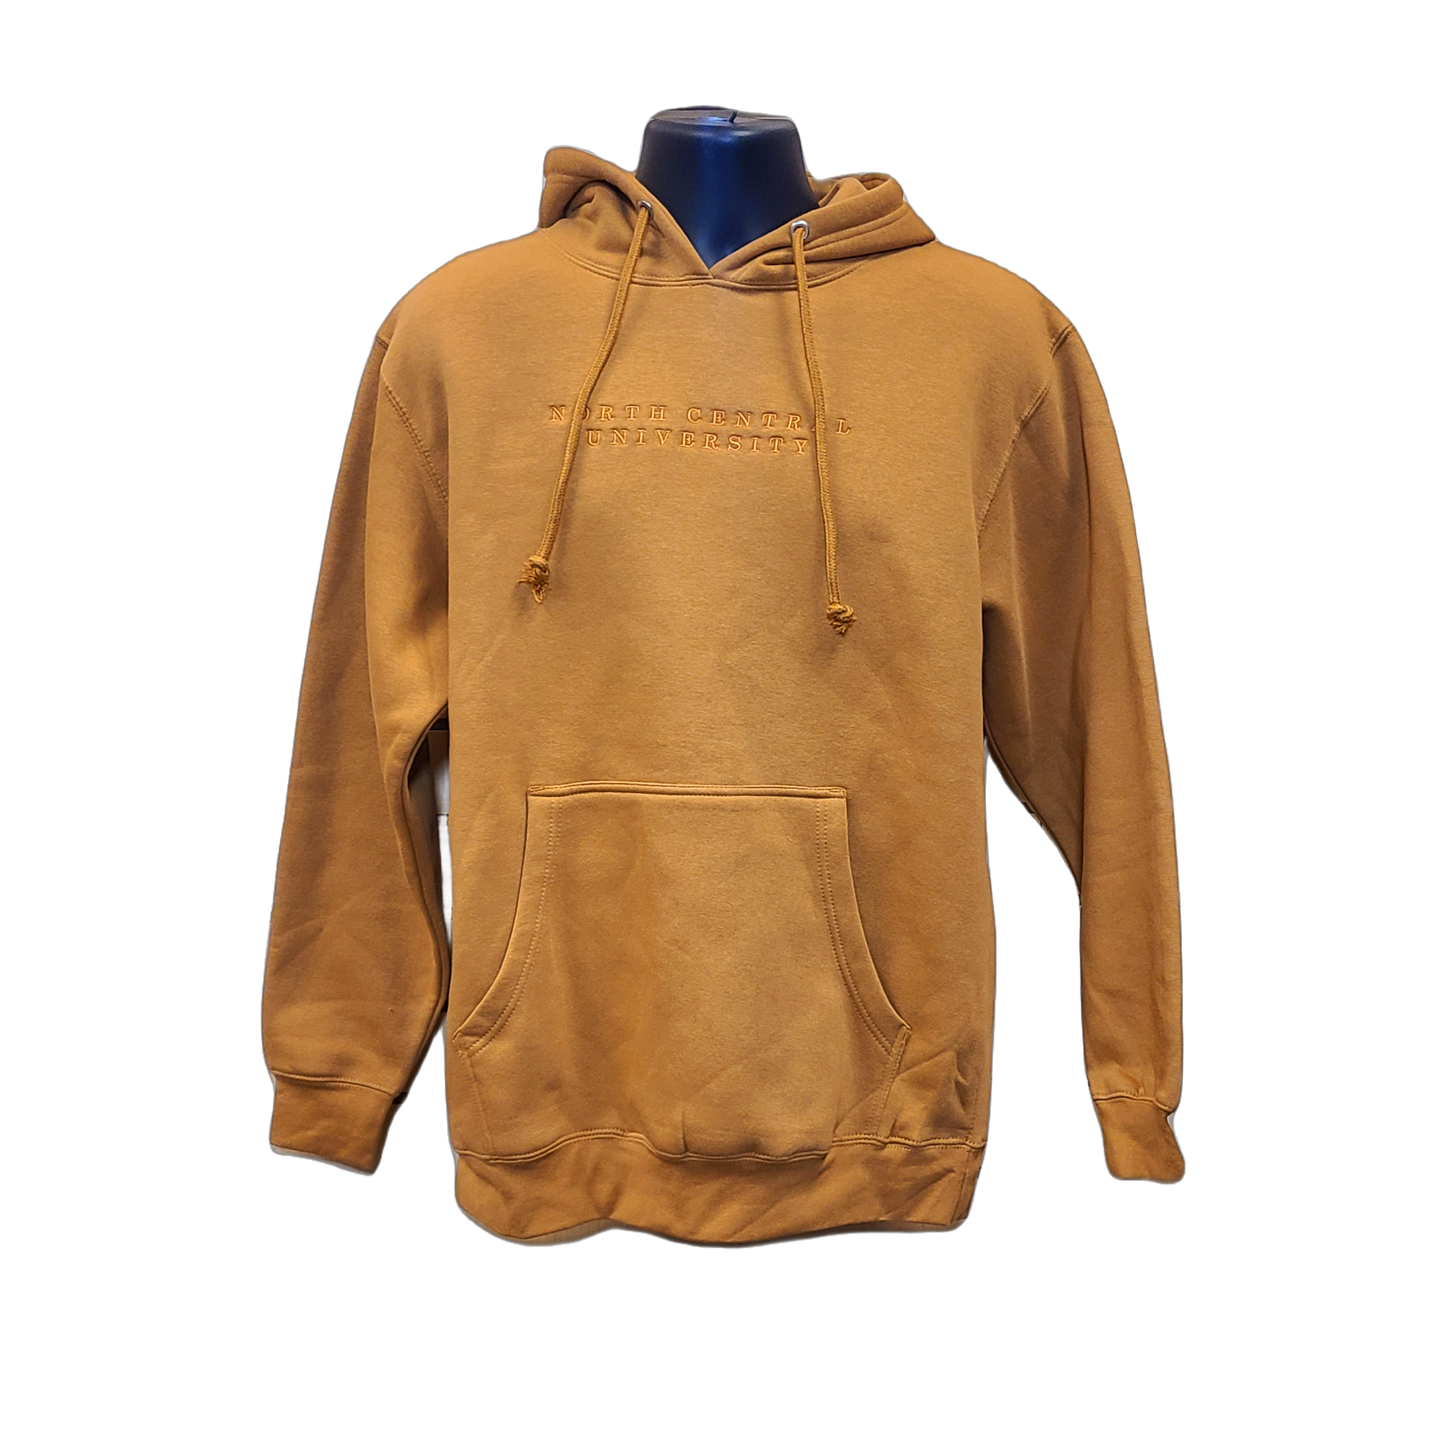 Embroidered Hoodie: Heavyweight